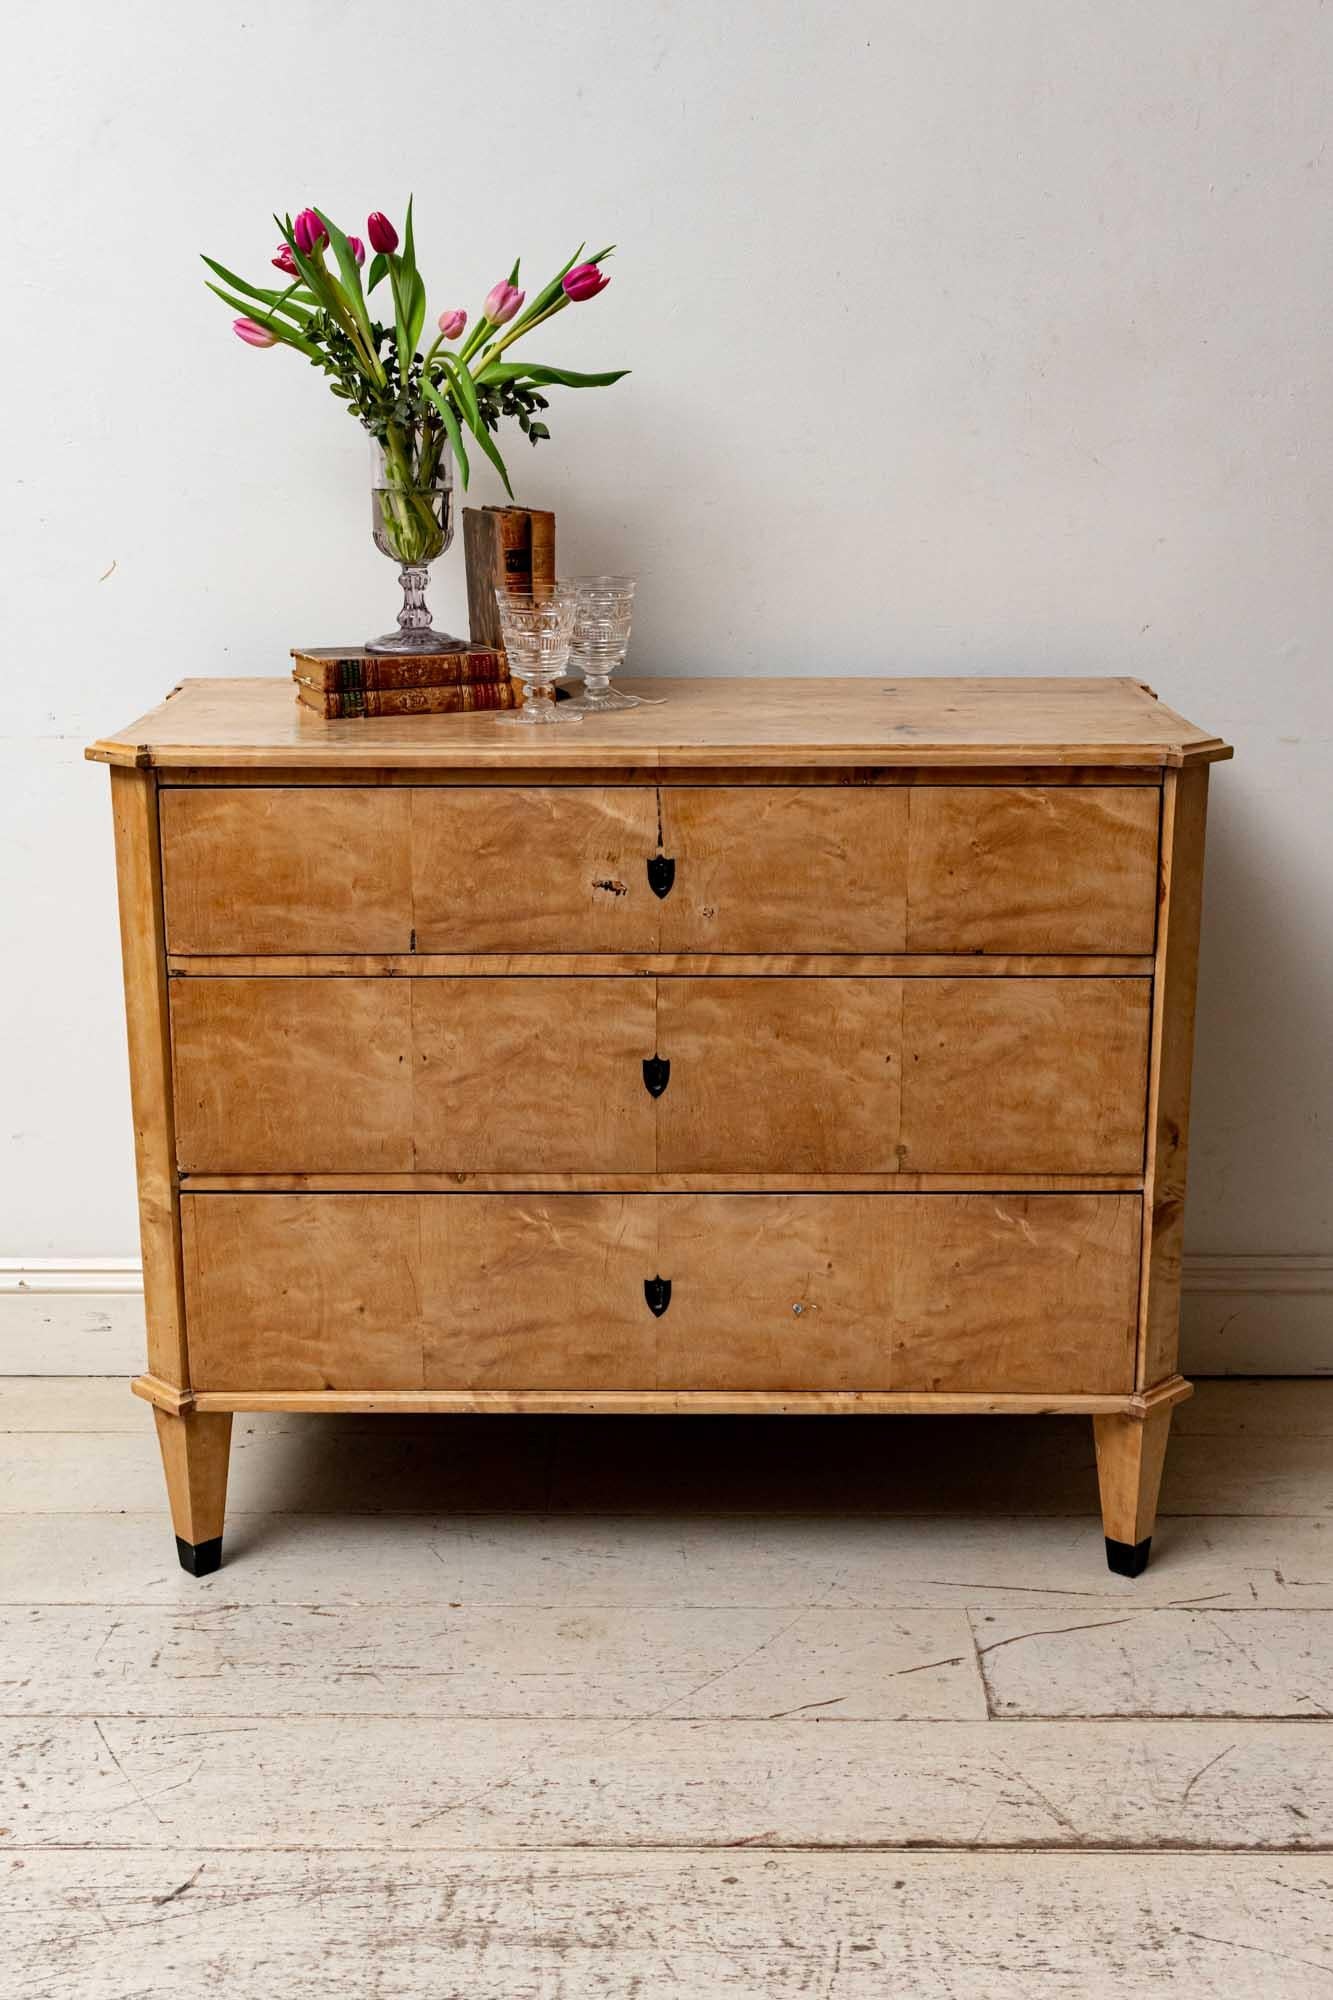 Late 19th century Birch commode comprising of three sliding drawers with their original keys and locks. The commode features a lovely pale coloured patina. A simple shaped design and form which would also work well within a more contemporary setting